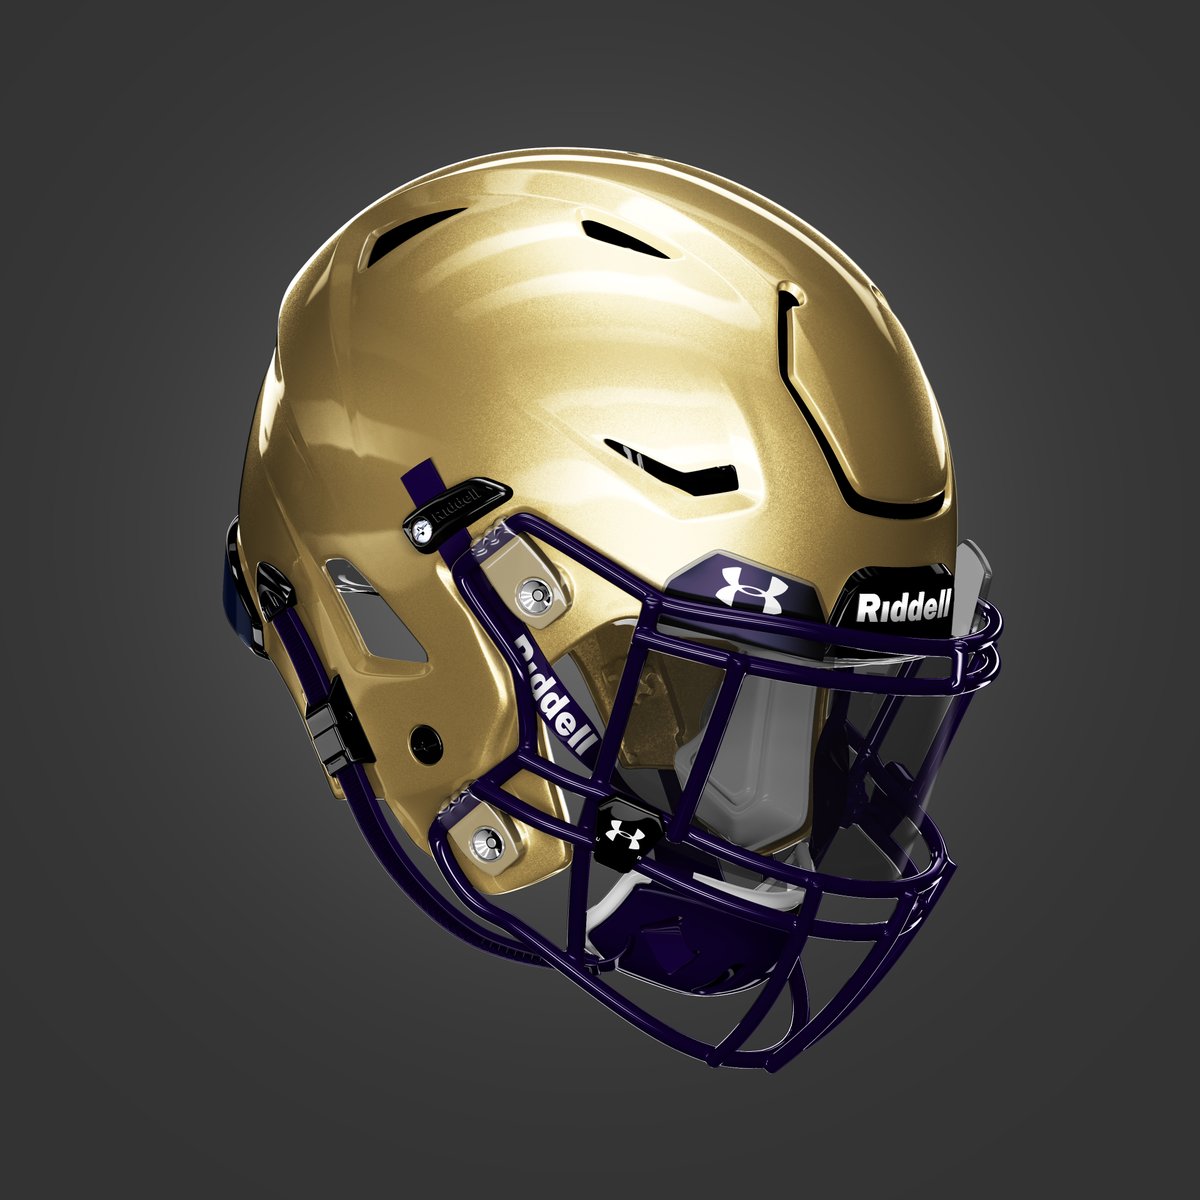 Clean and classic Vegas gold lids for the Routt Catholic Rockets!

Got some things in the works for their entire helmet history, too. Stay tuned 👀

Rockets open their '23 season on the road against Calhoun/Brussels!

#RocketNation🚀 #22Days